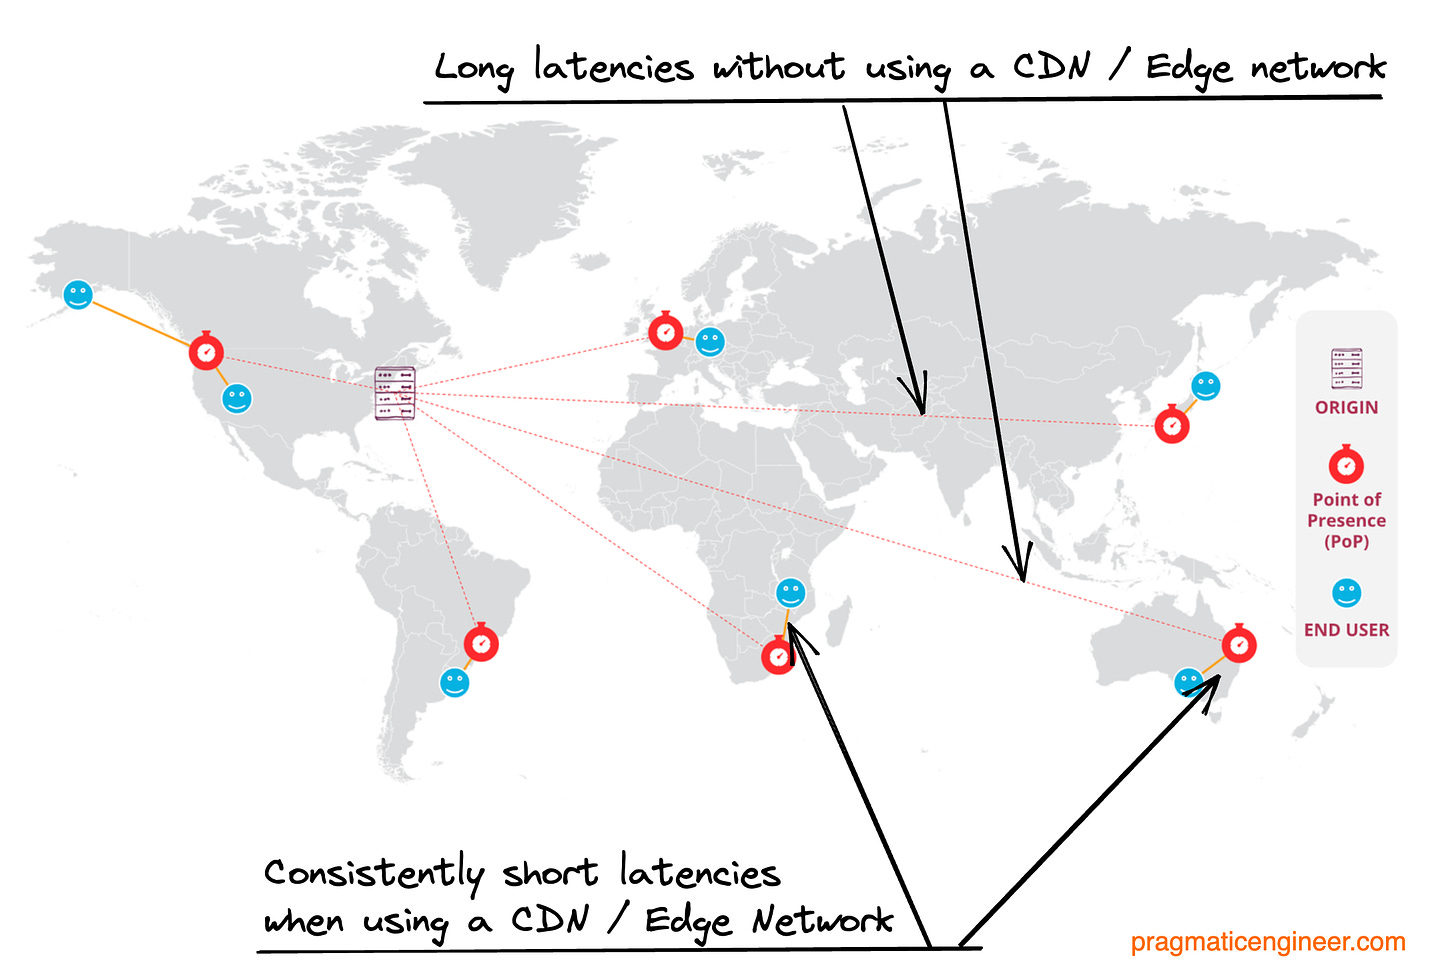 The benefit of using a CDN or Edge network: reducing latency for end users